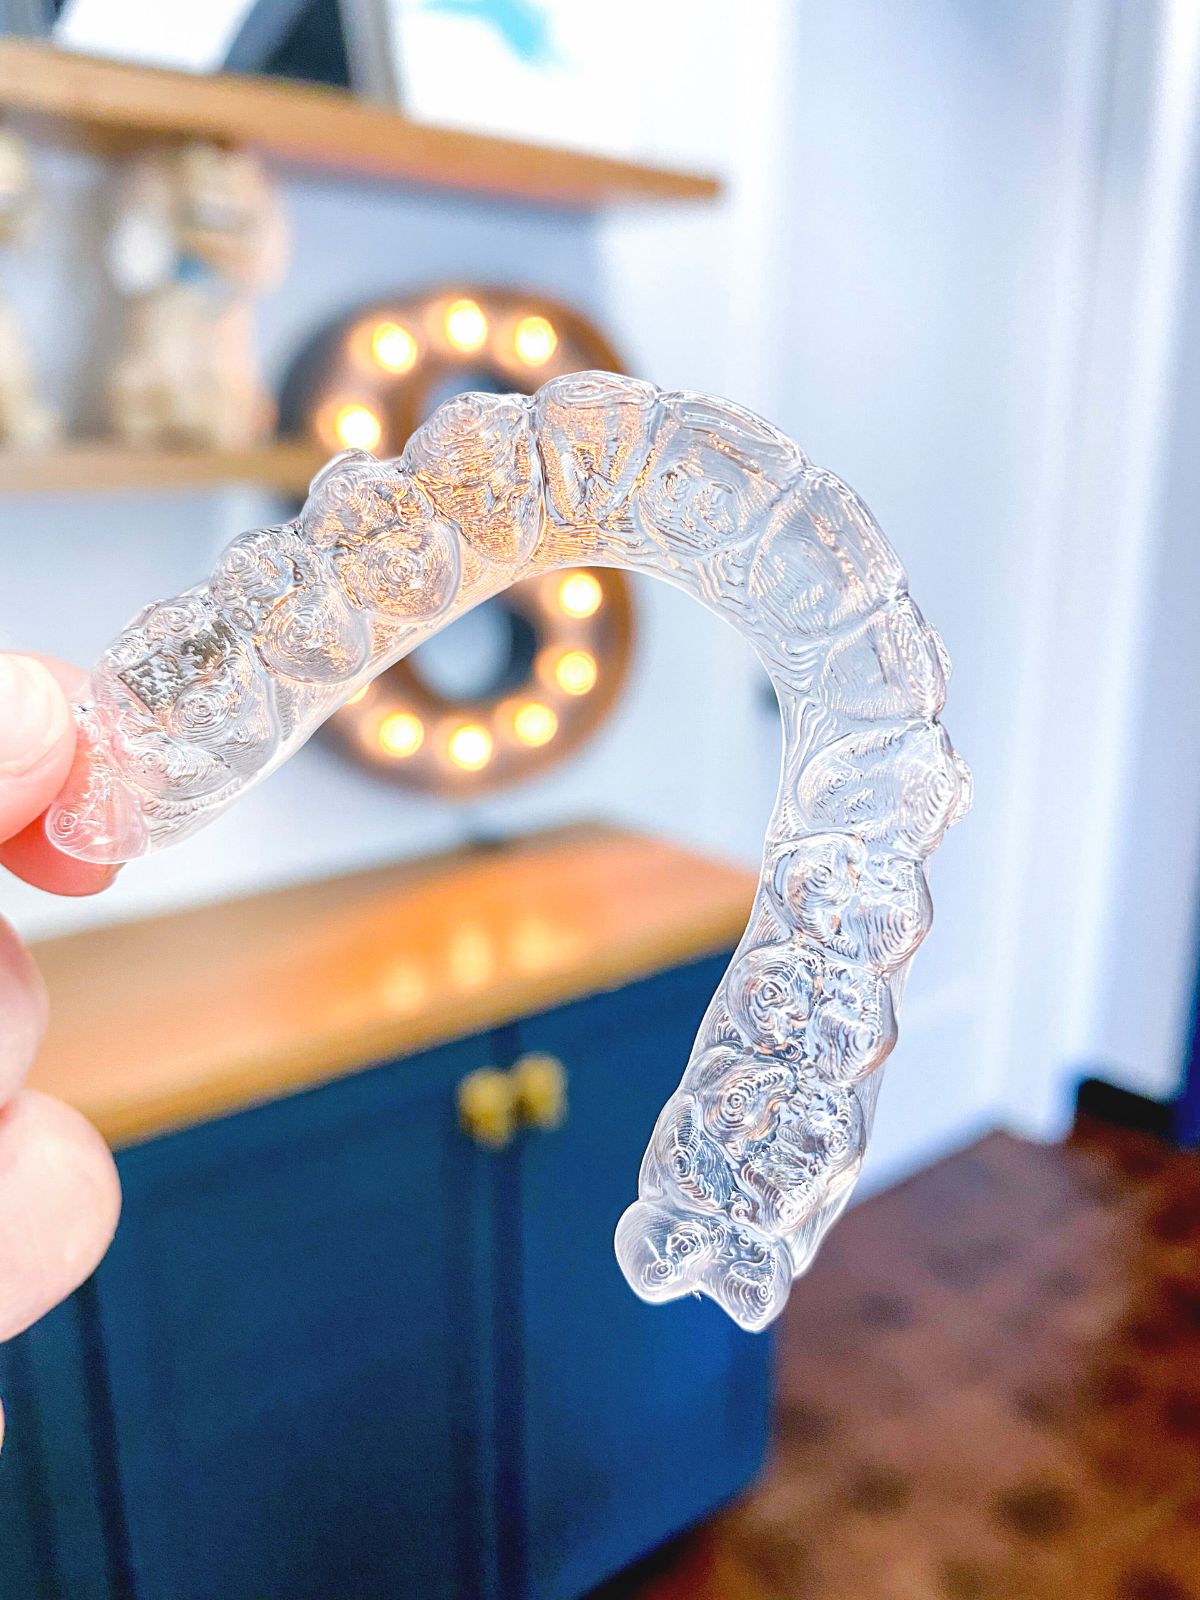 Tips for Caring for Your Clear Aligners